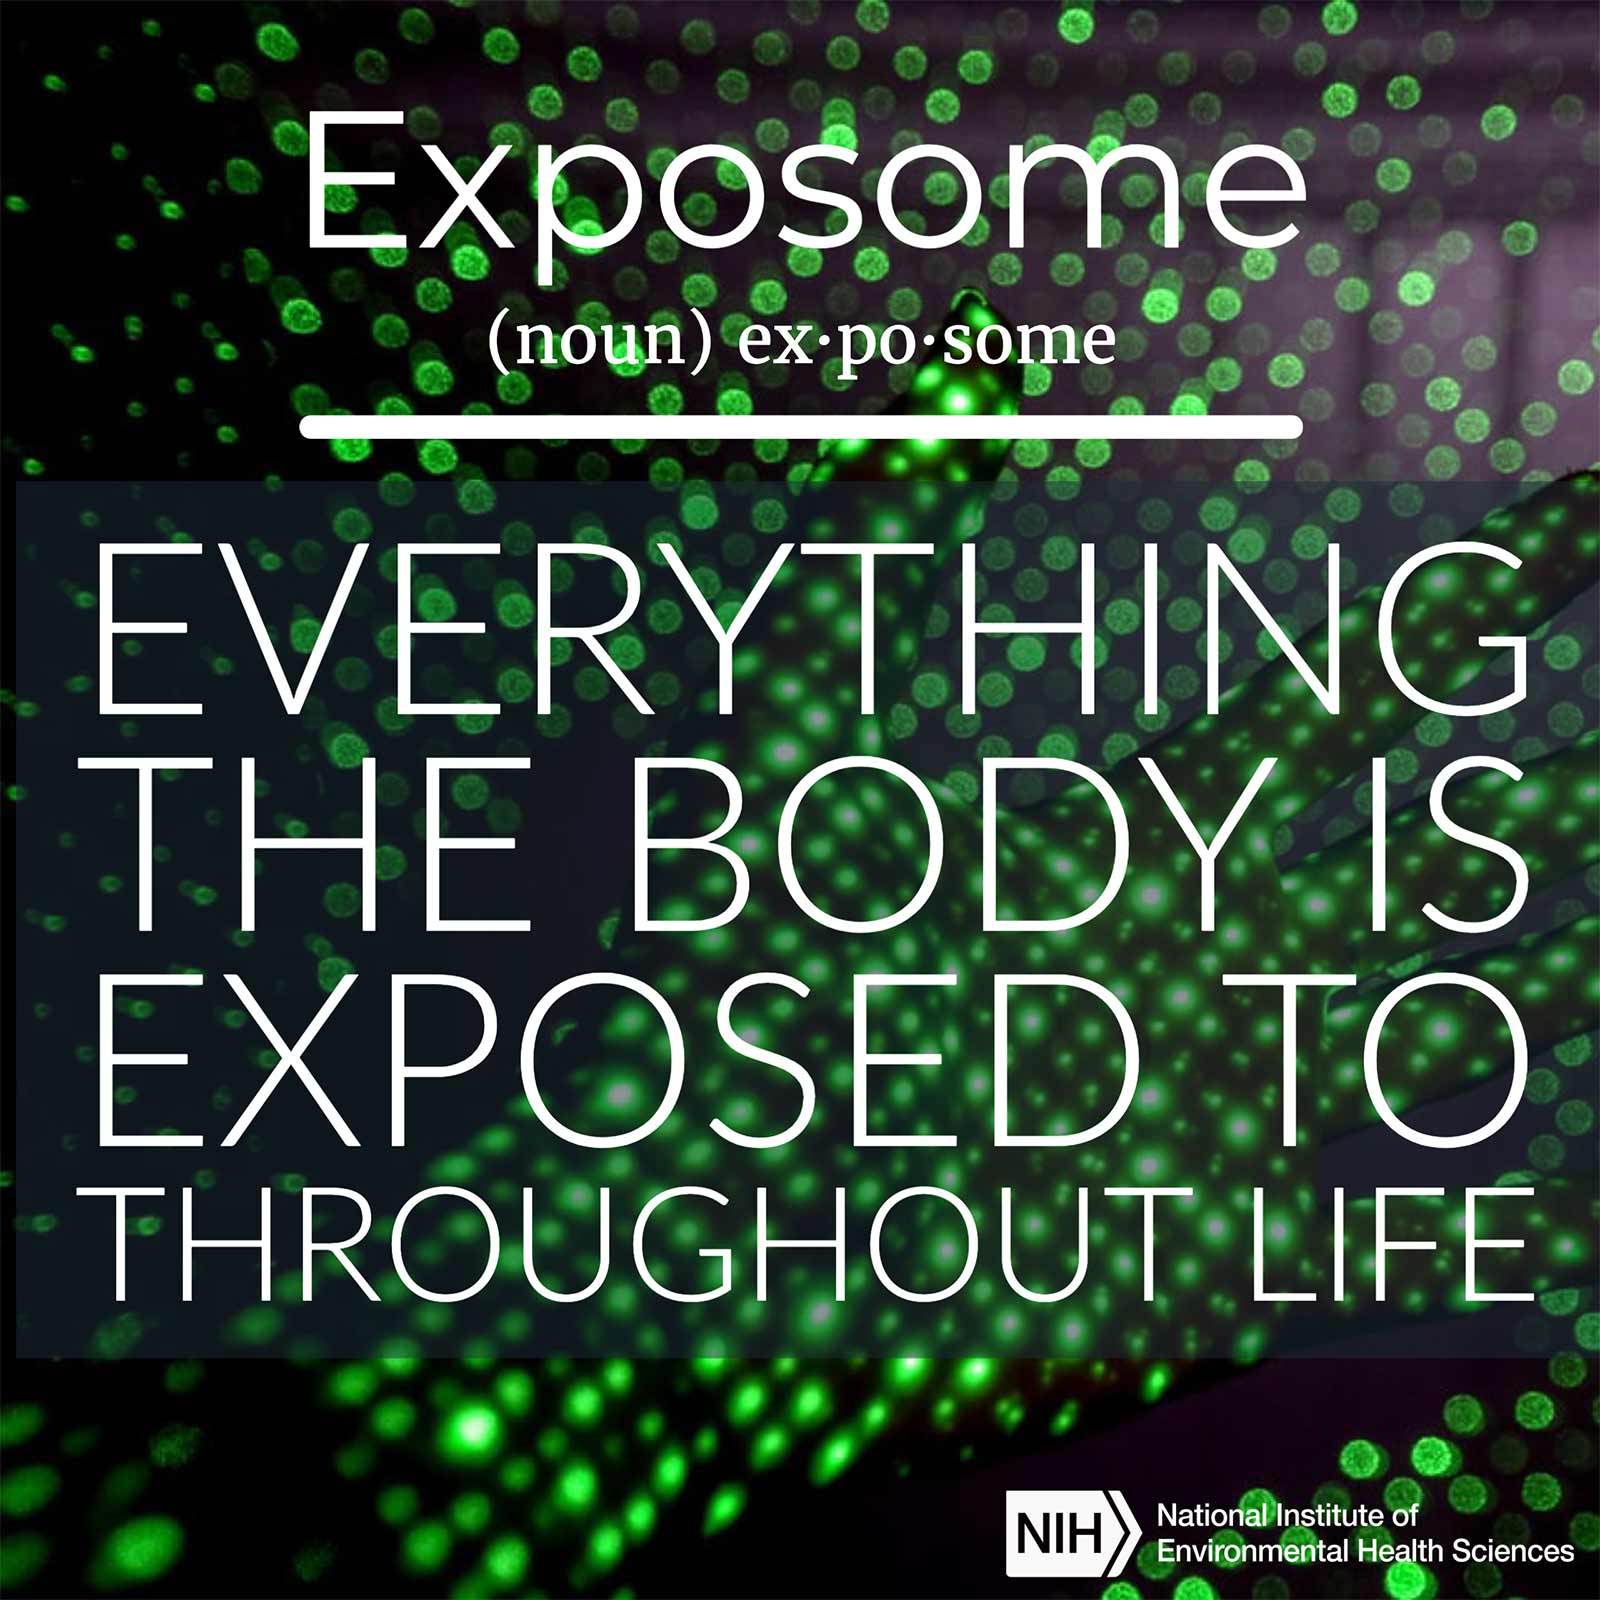 Exposome (noun) defined as &#39;everything the body is exposed to throughout life.&#39;